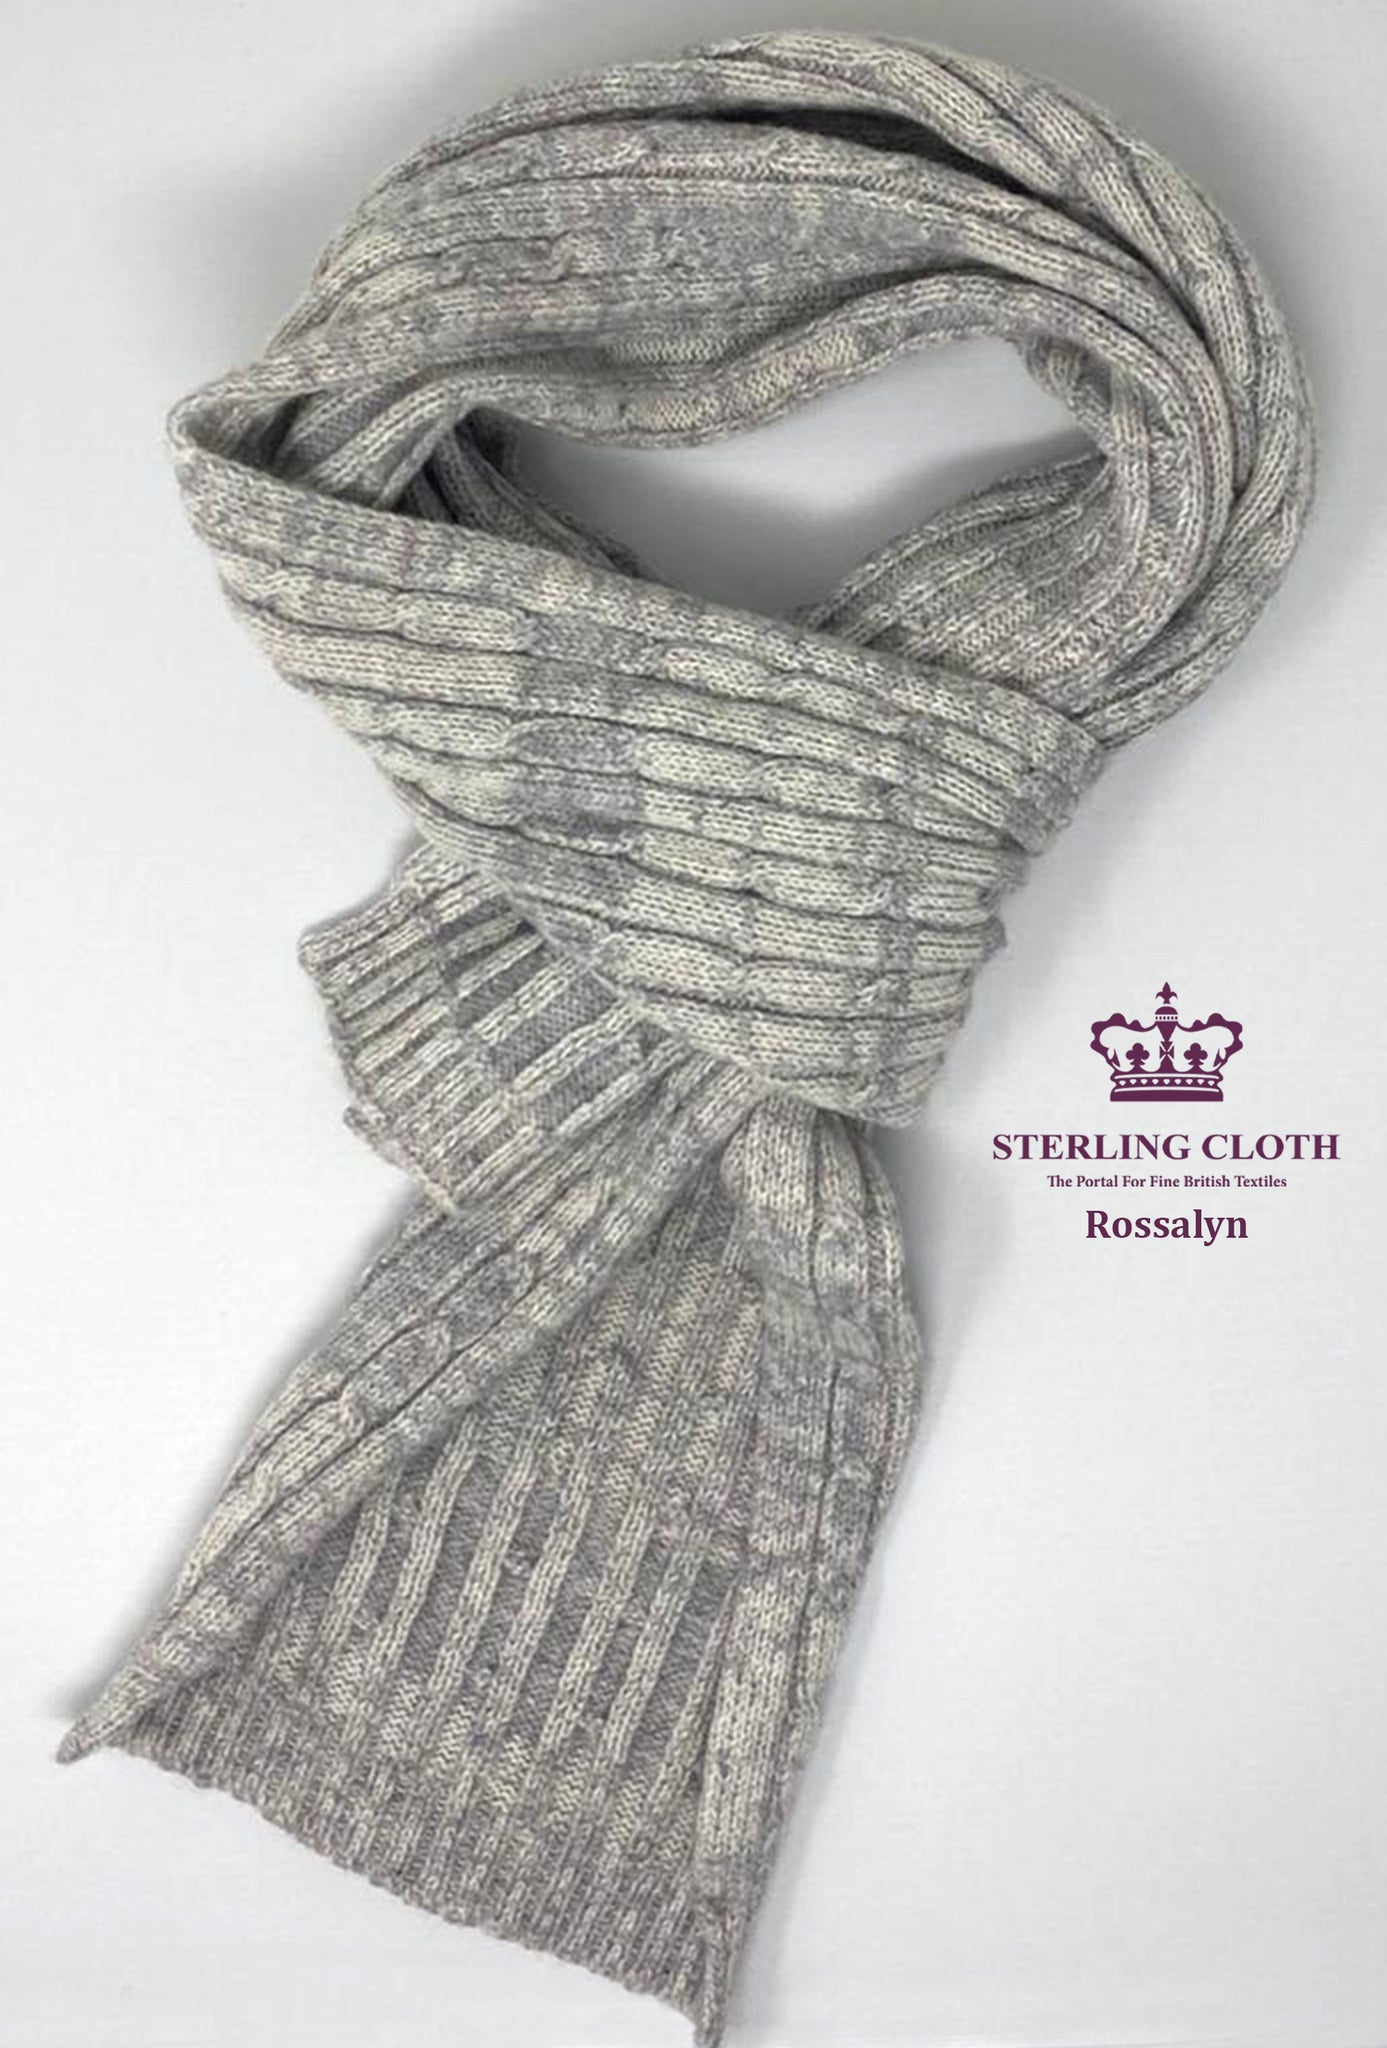 Rossalyn - Pure Merino Wool, Fancy Knitted Scarf, Made in Scotland, Irregular Grey and Light Grey Pattern